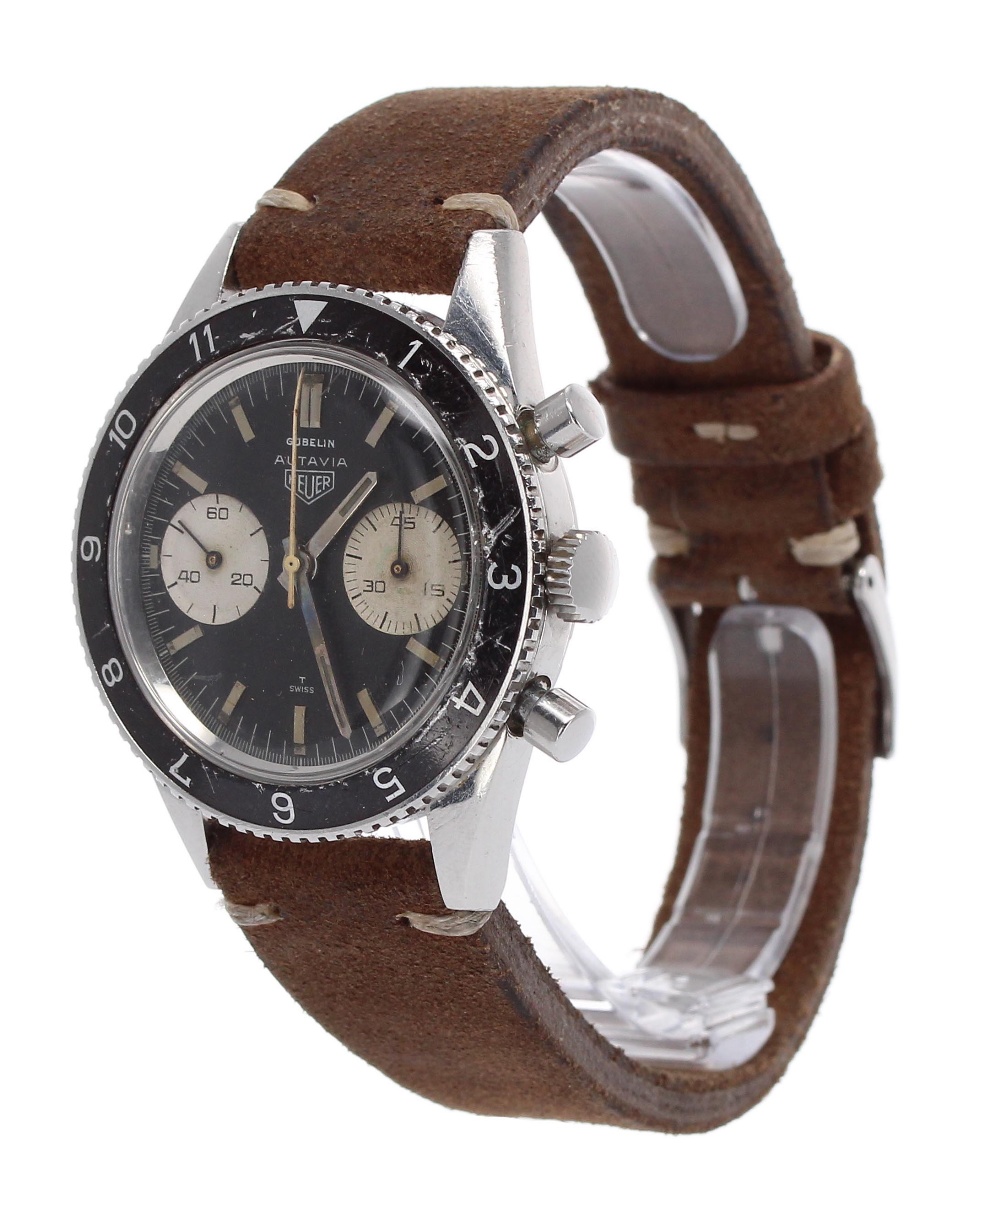 Heuer Autavia chronograph stainless steel gentleman's wristwatch retailed by Gubelin, ref. 3646, - Image 2 of 7